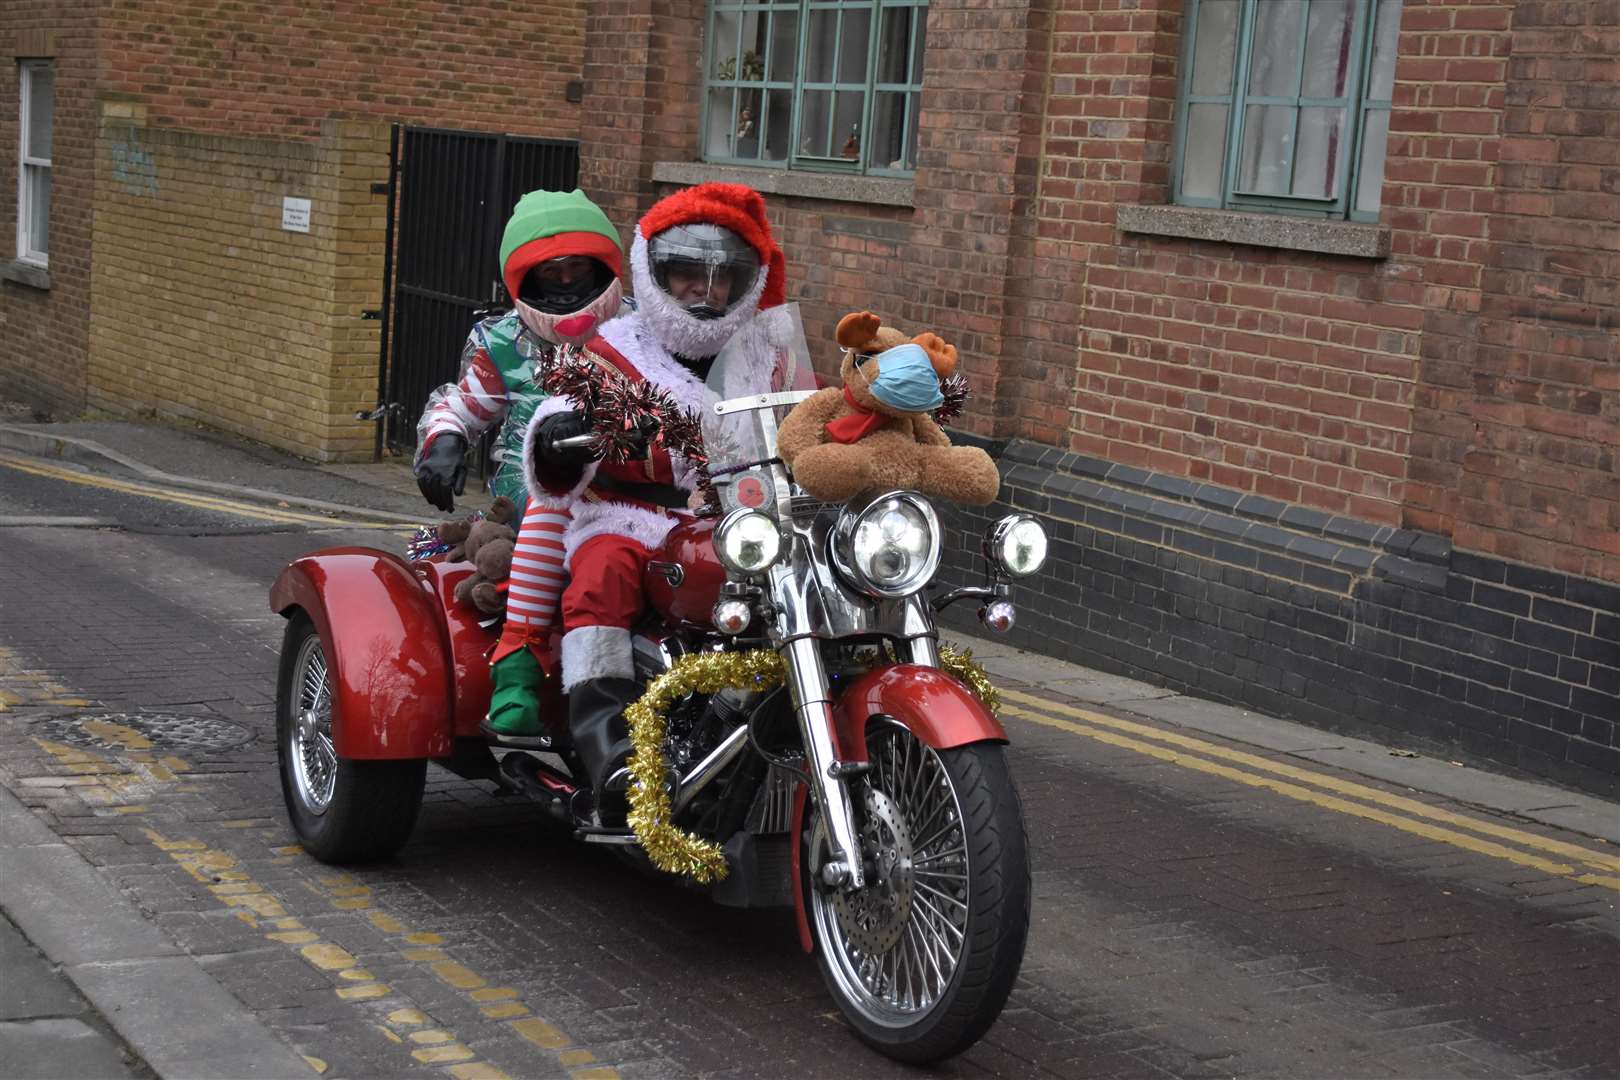 Santa adopted an unconvential mode of transport. Photo: Jason Arthur